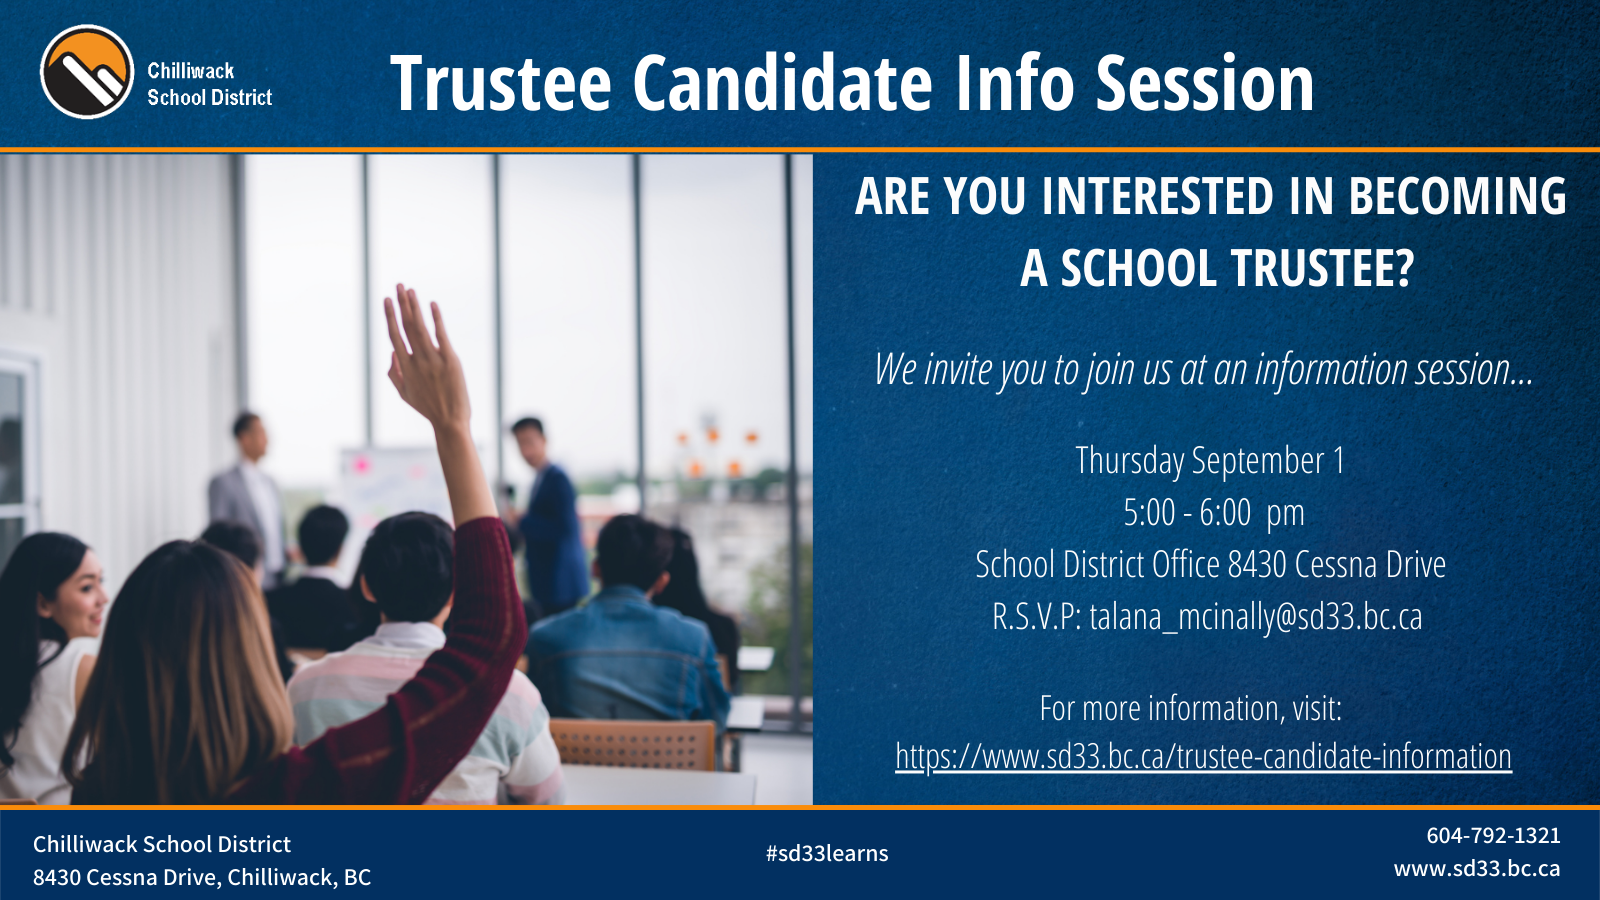 Trustee Candidate Info Session